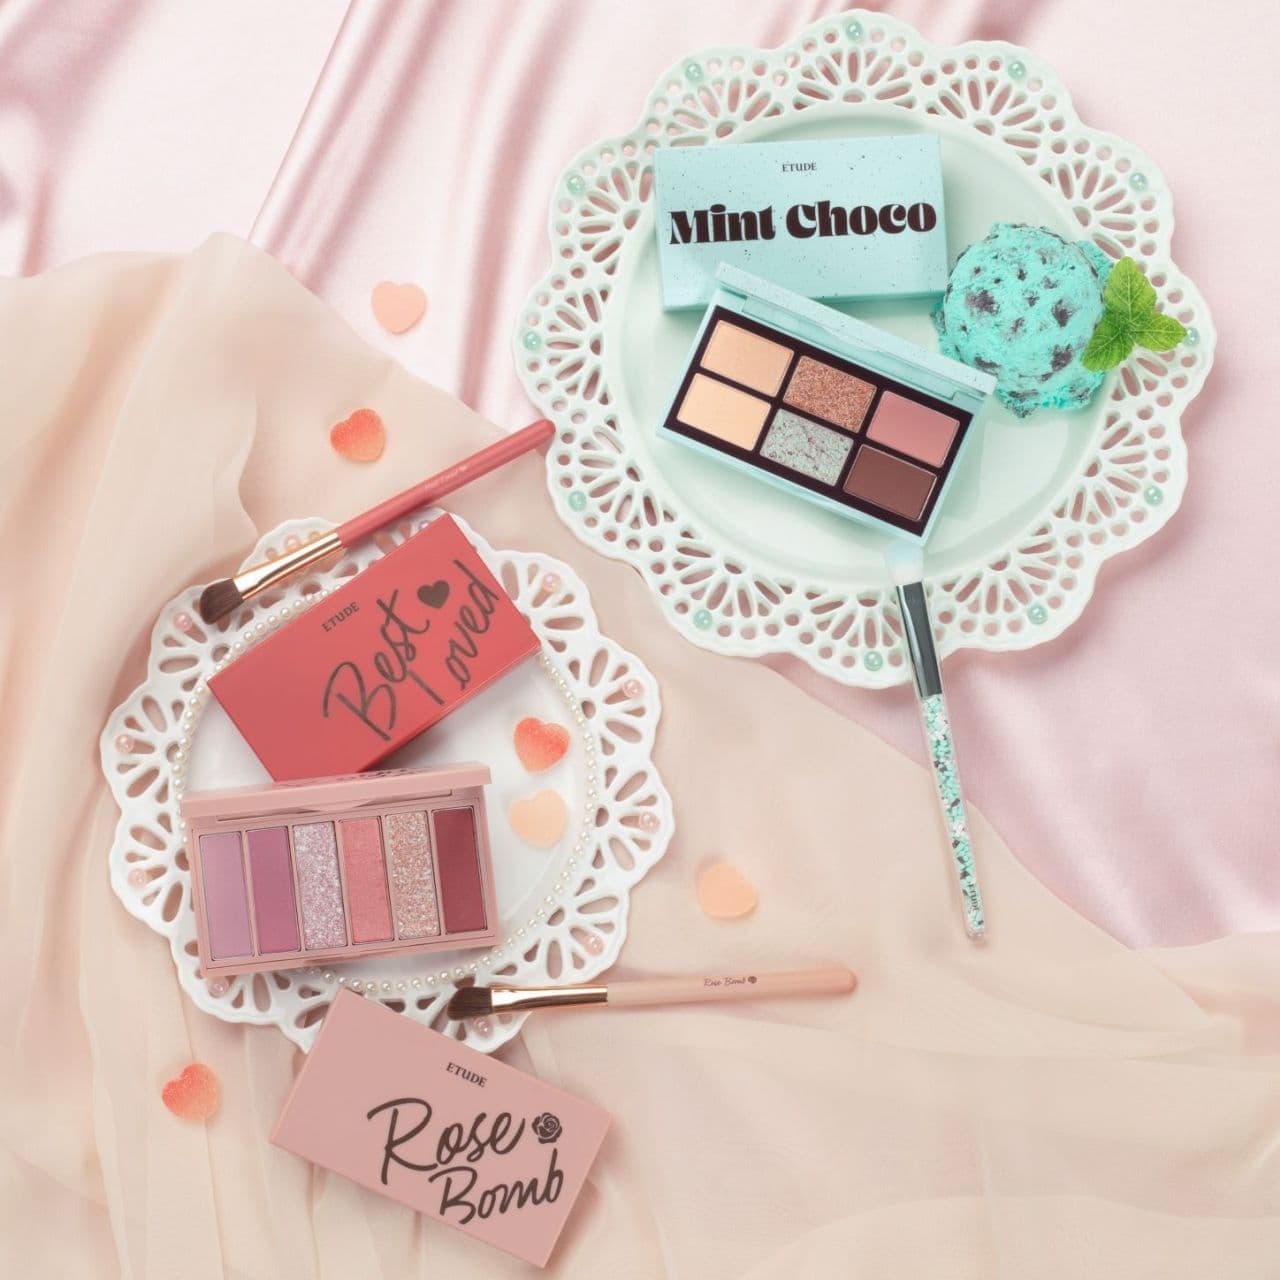 Etude "Play Color Eyes Mini Special Kit